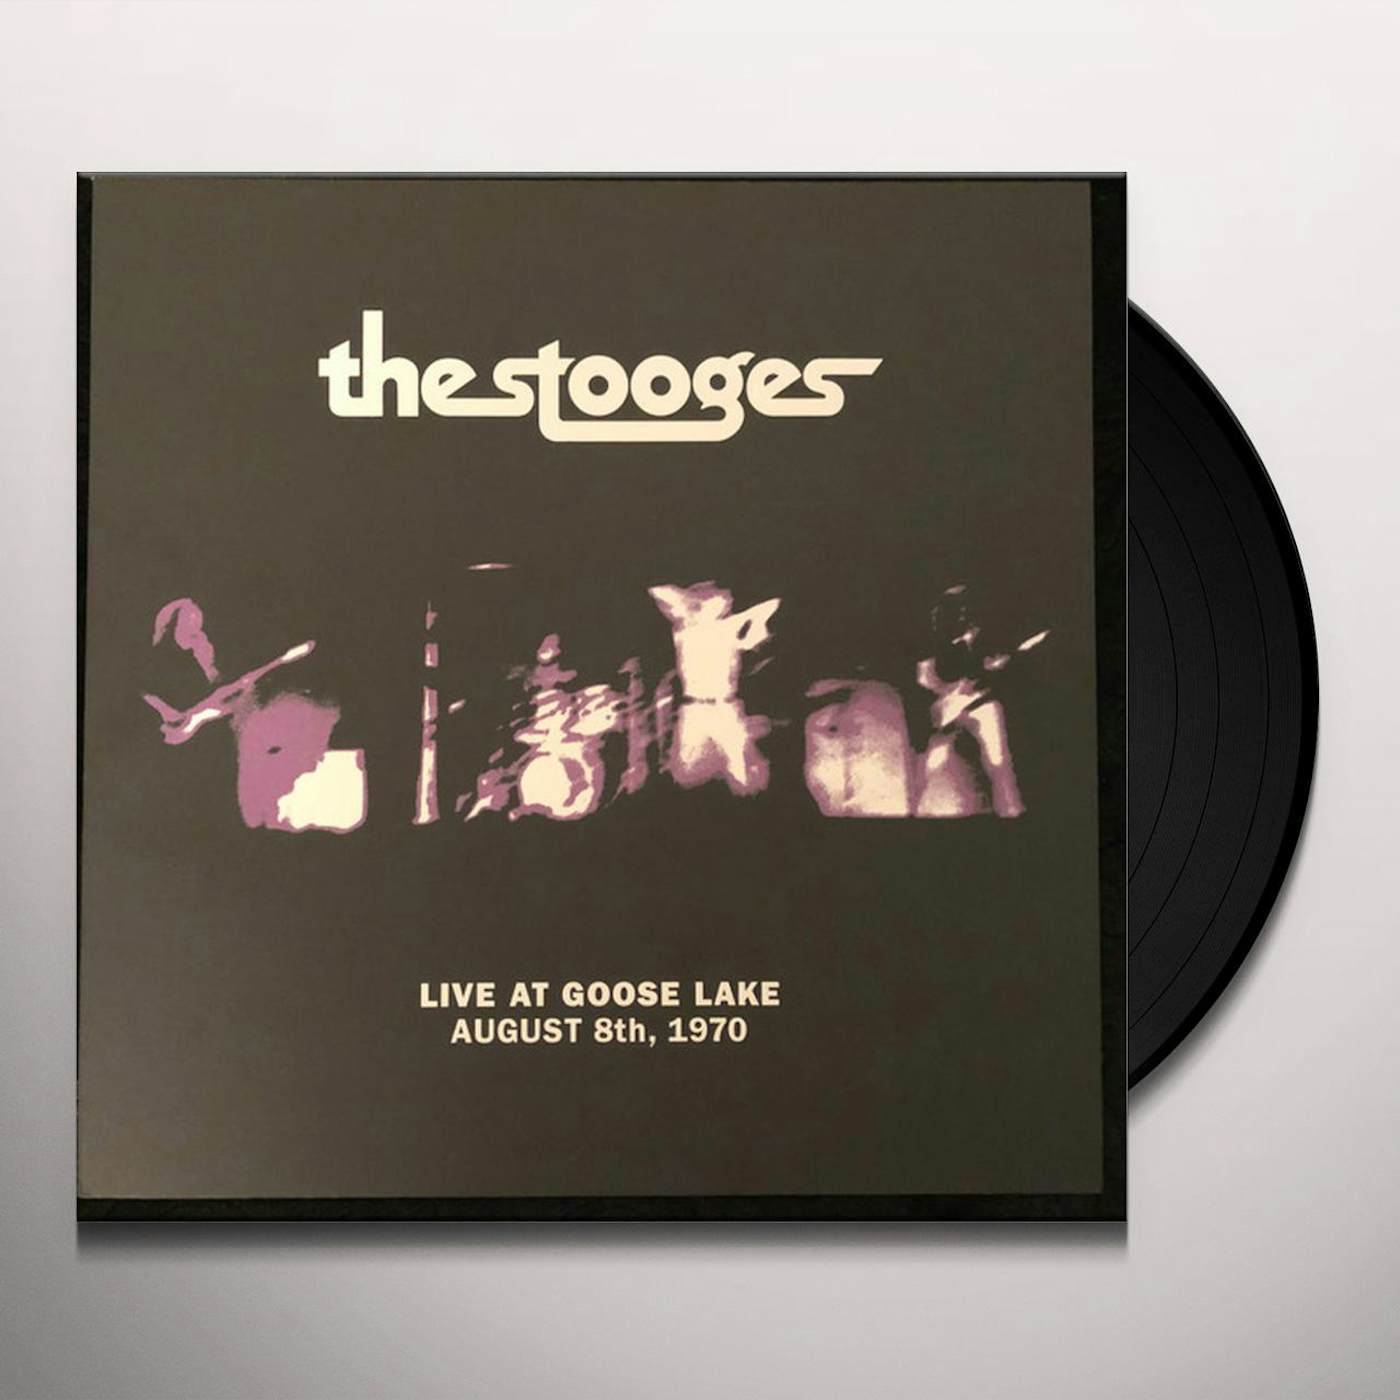 The Stooges Live at Goose Lake: August 8th 1970 Vinyl Record